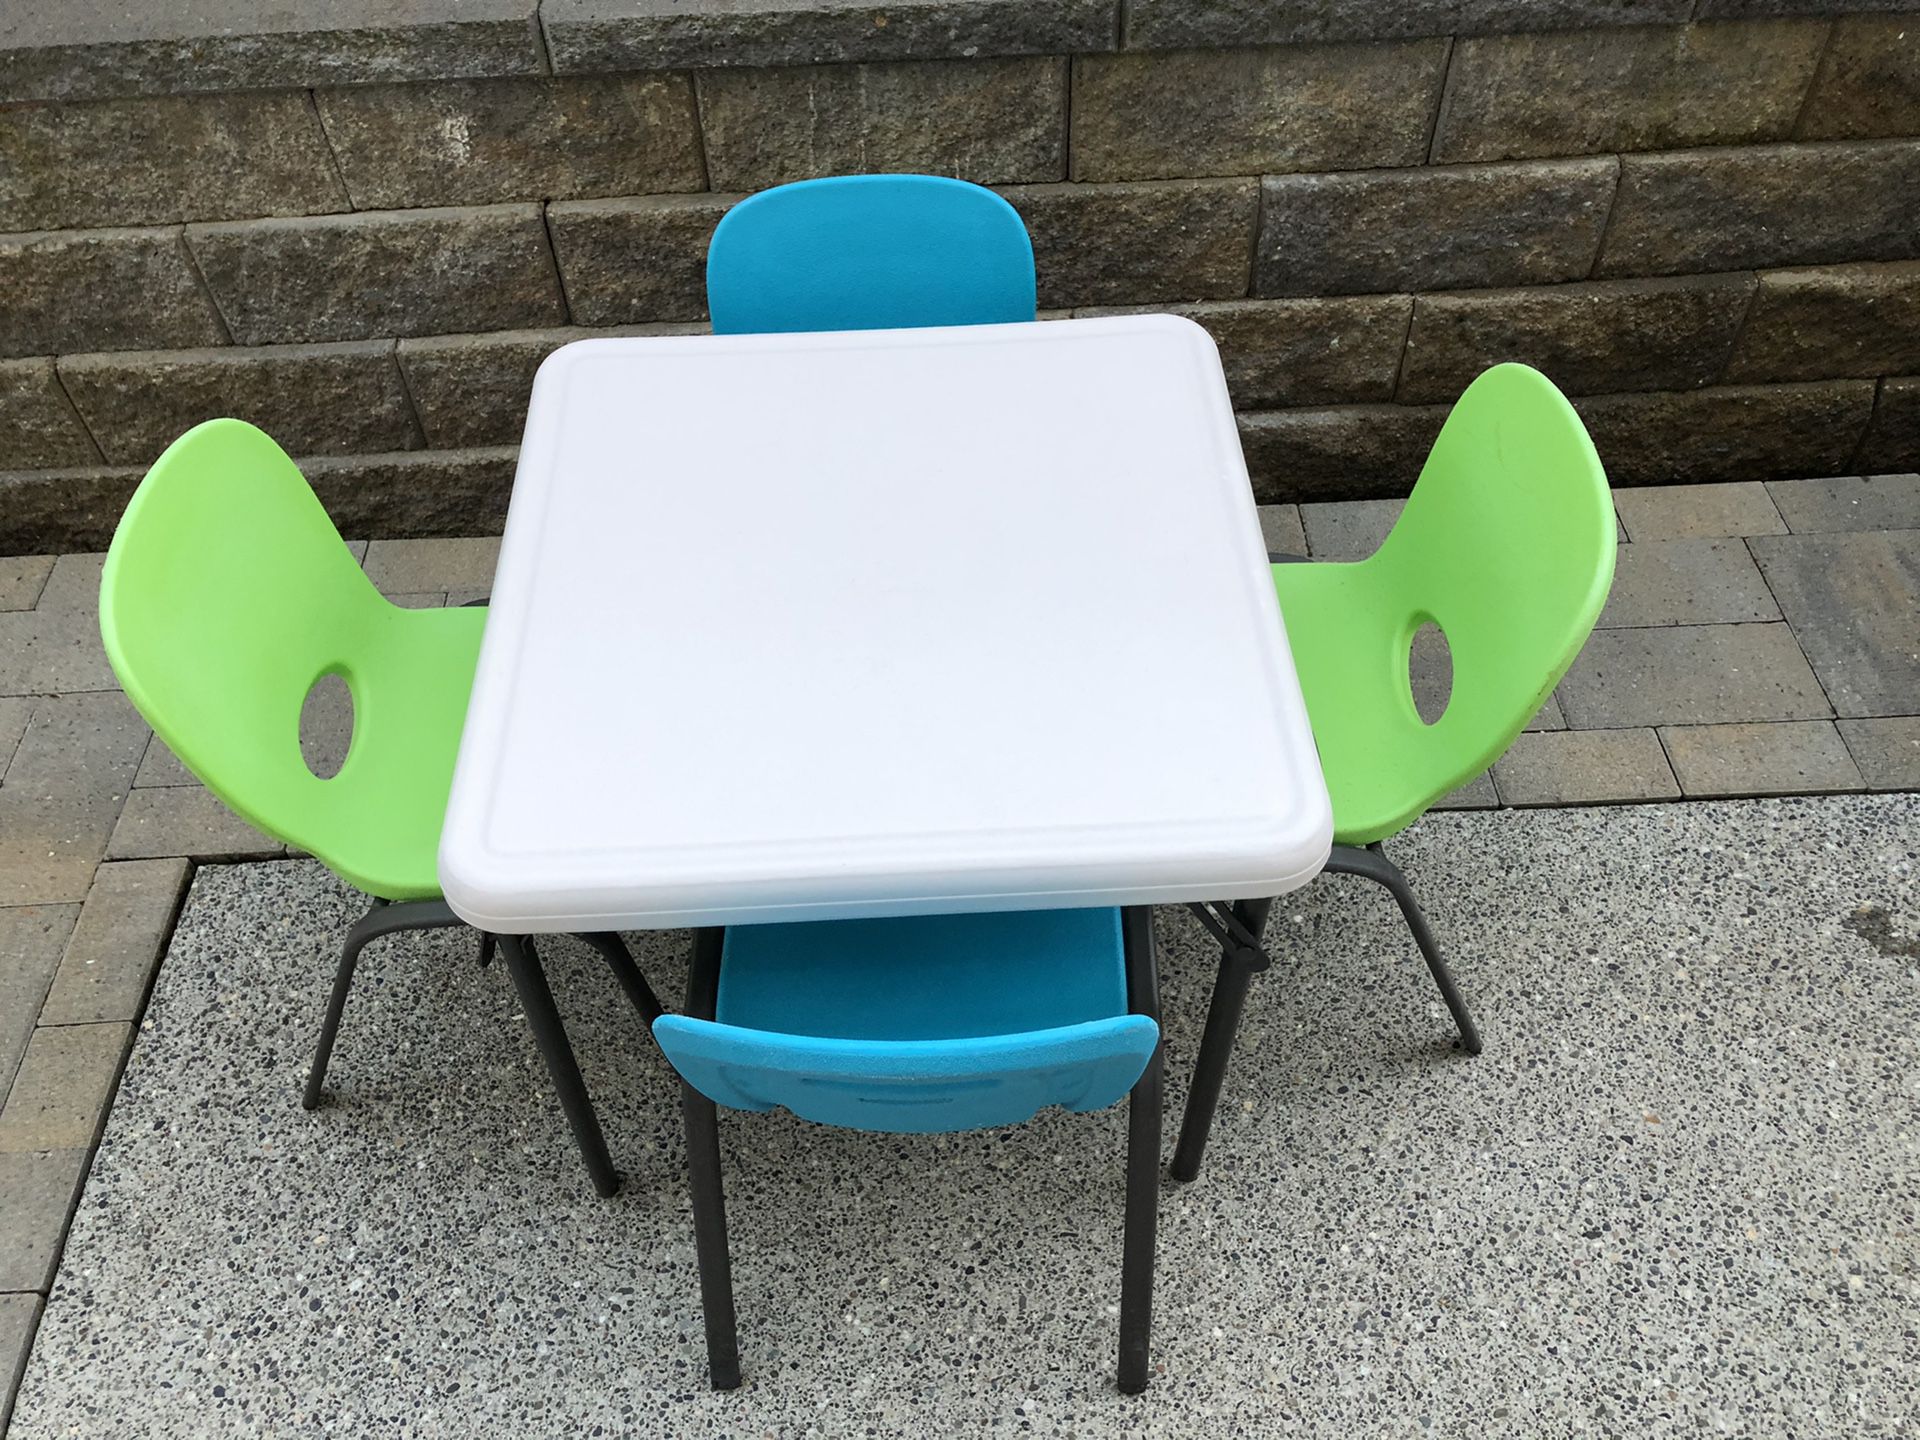 Lifetime kids table and chairs from Costco